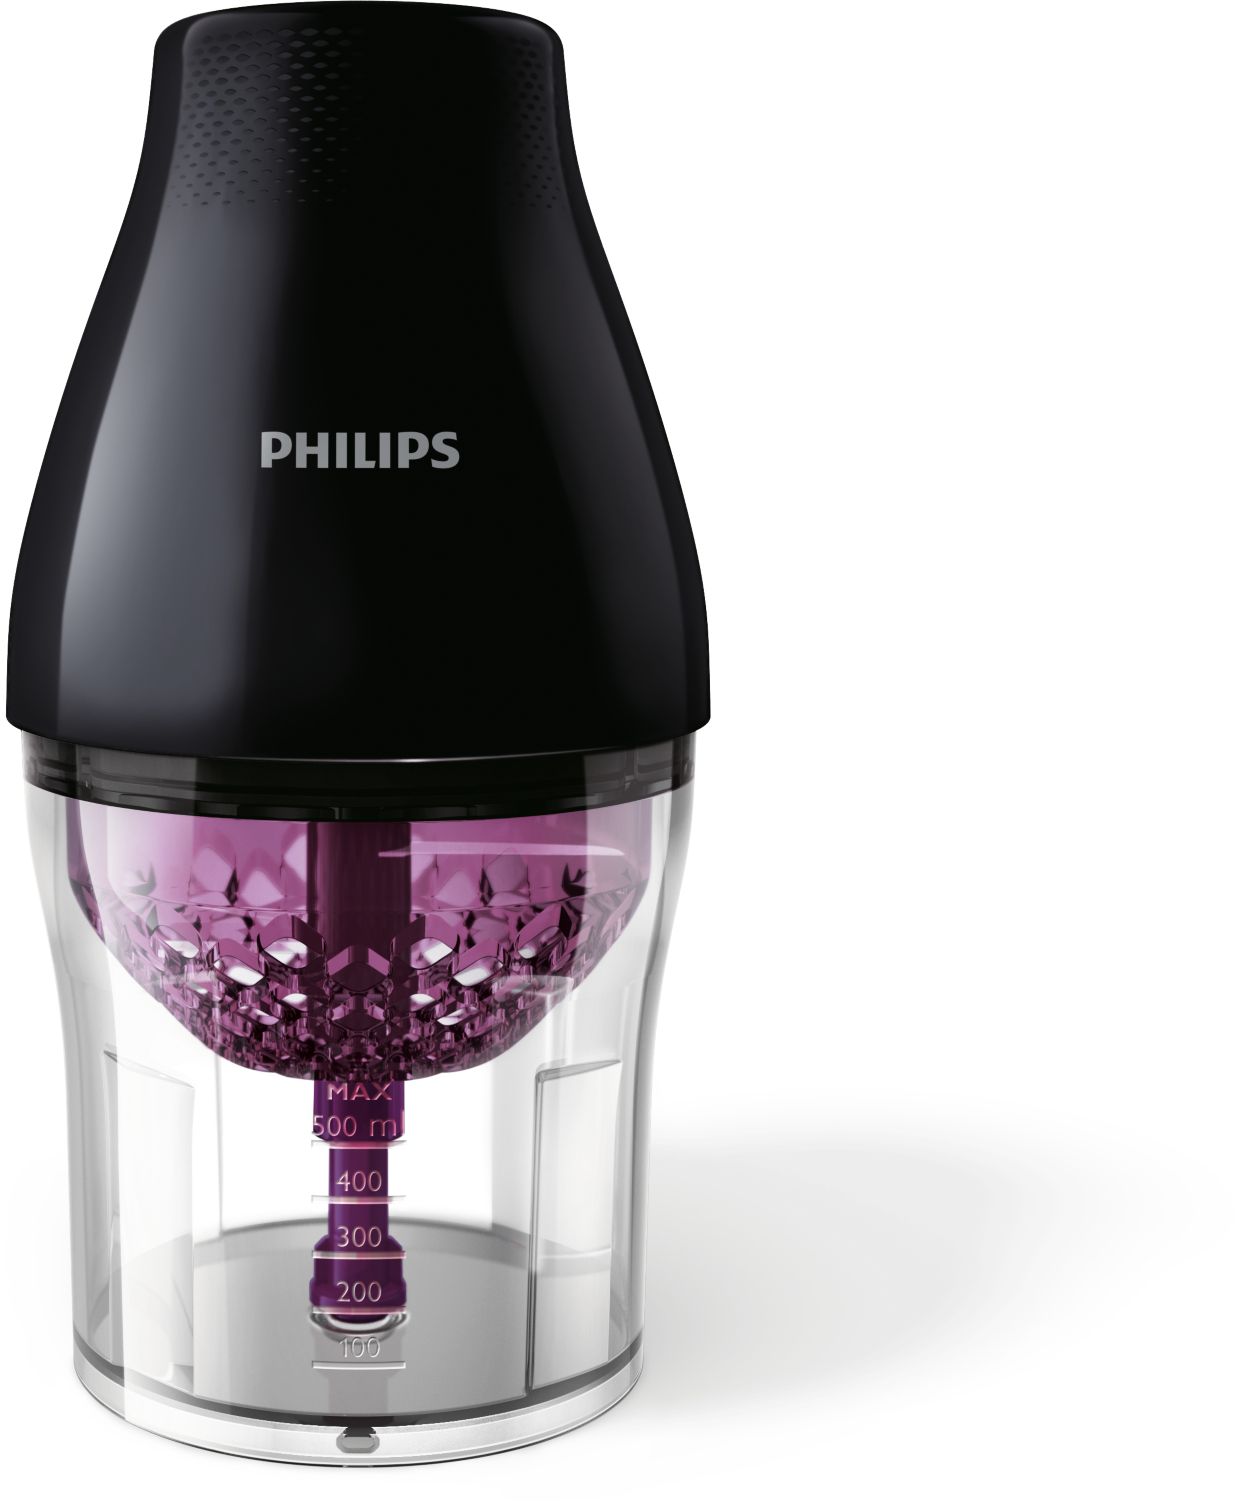 https://images.philips.com/is/image/philipsconsumer/7498a01873684919924cad2600f0286f?$jpglarge$&wid=1250